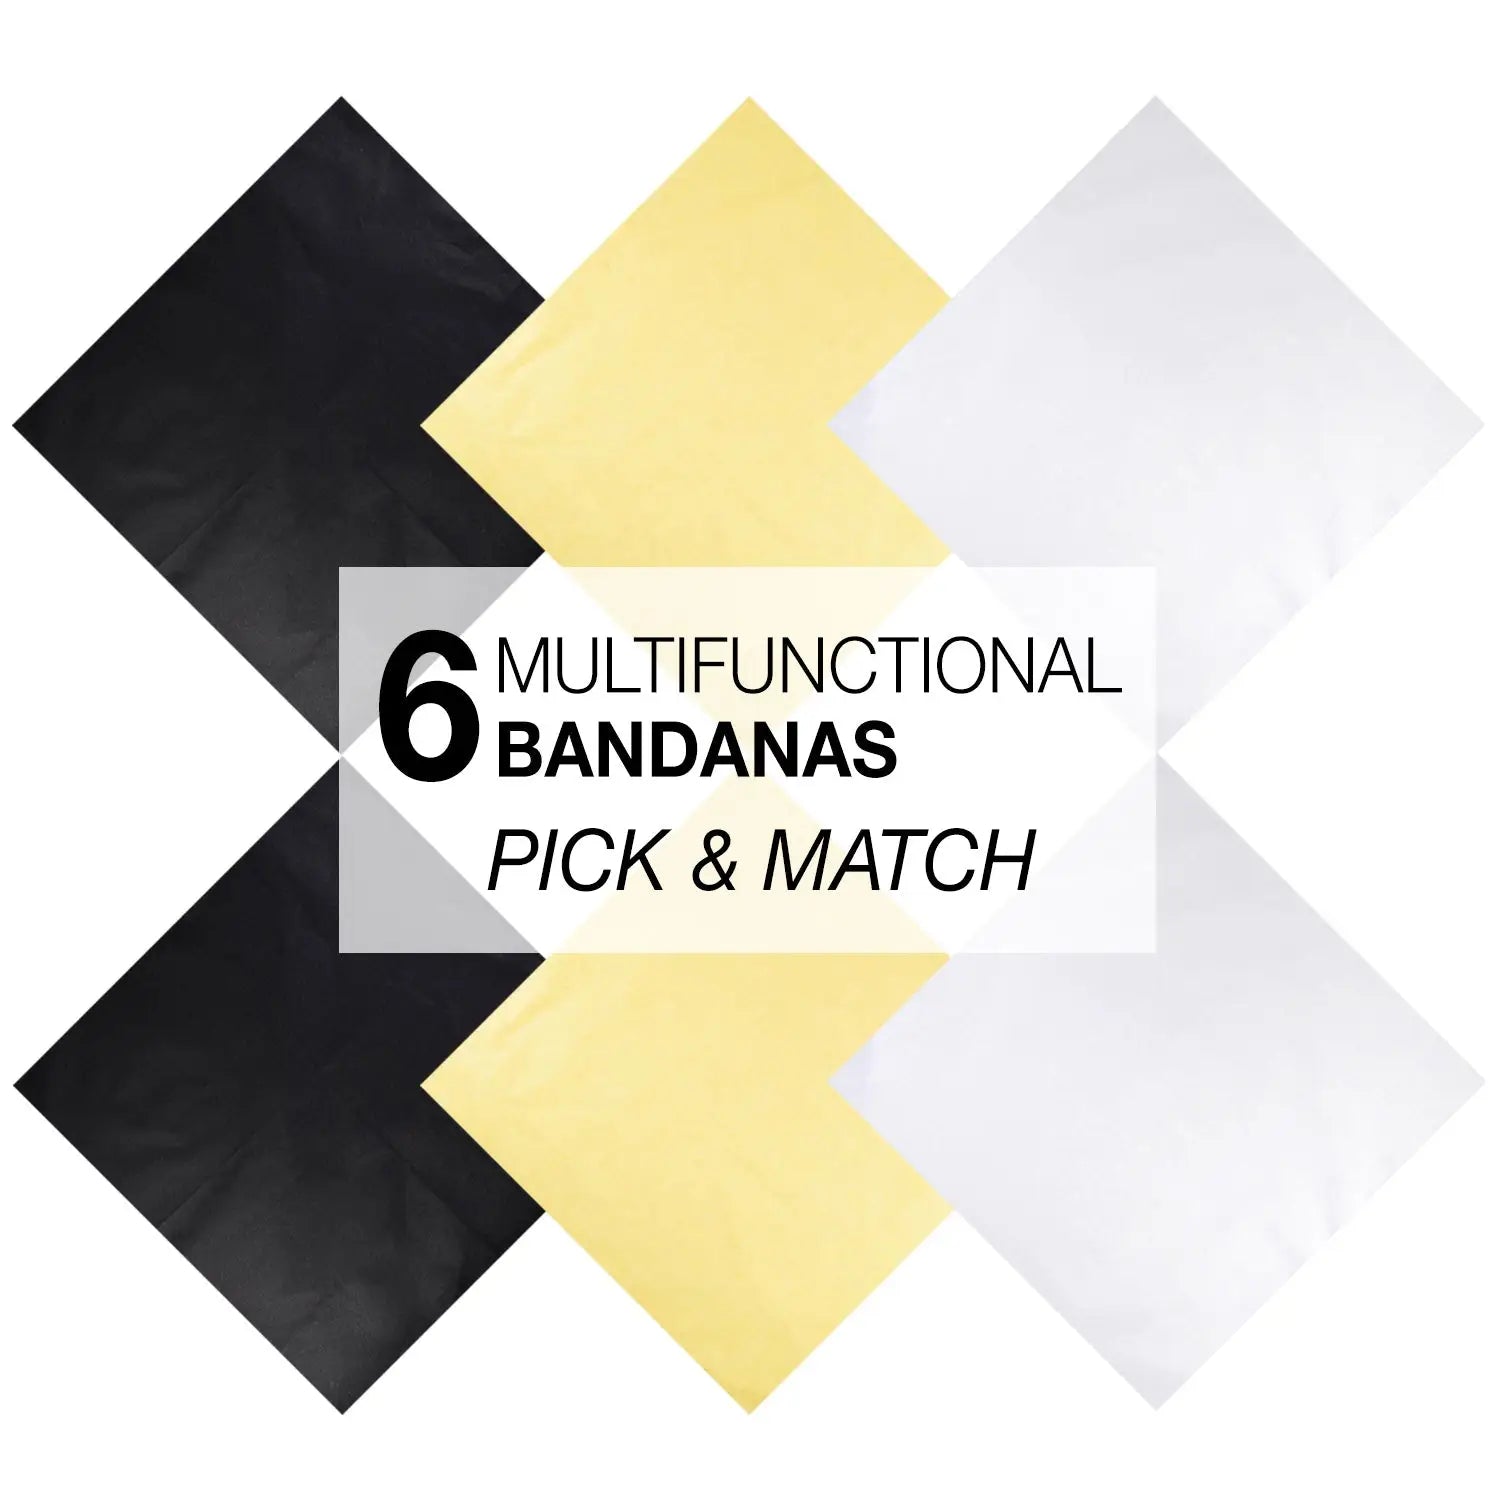 Plain Cotton Bandana Set - 6PCS with 6 functional bands for pick and match